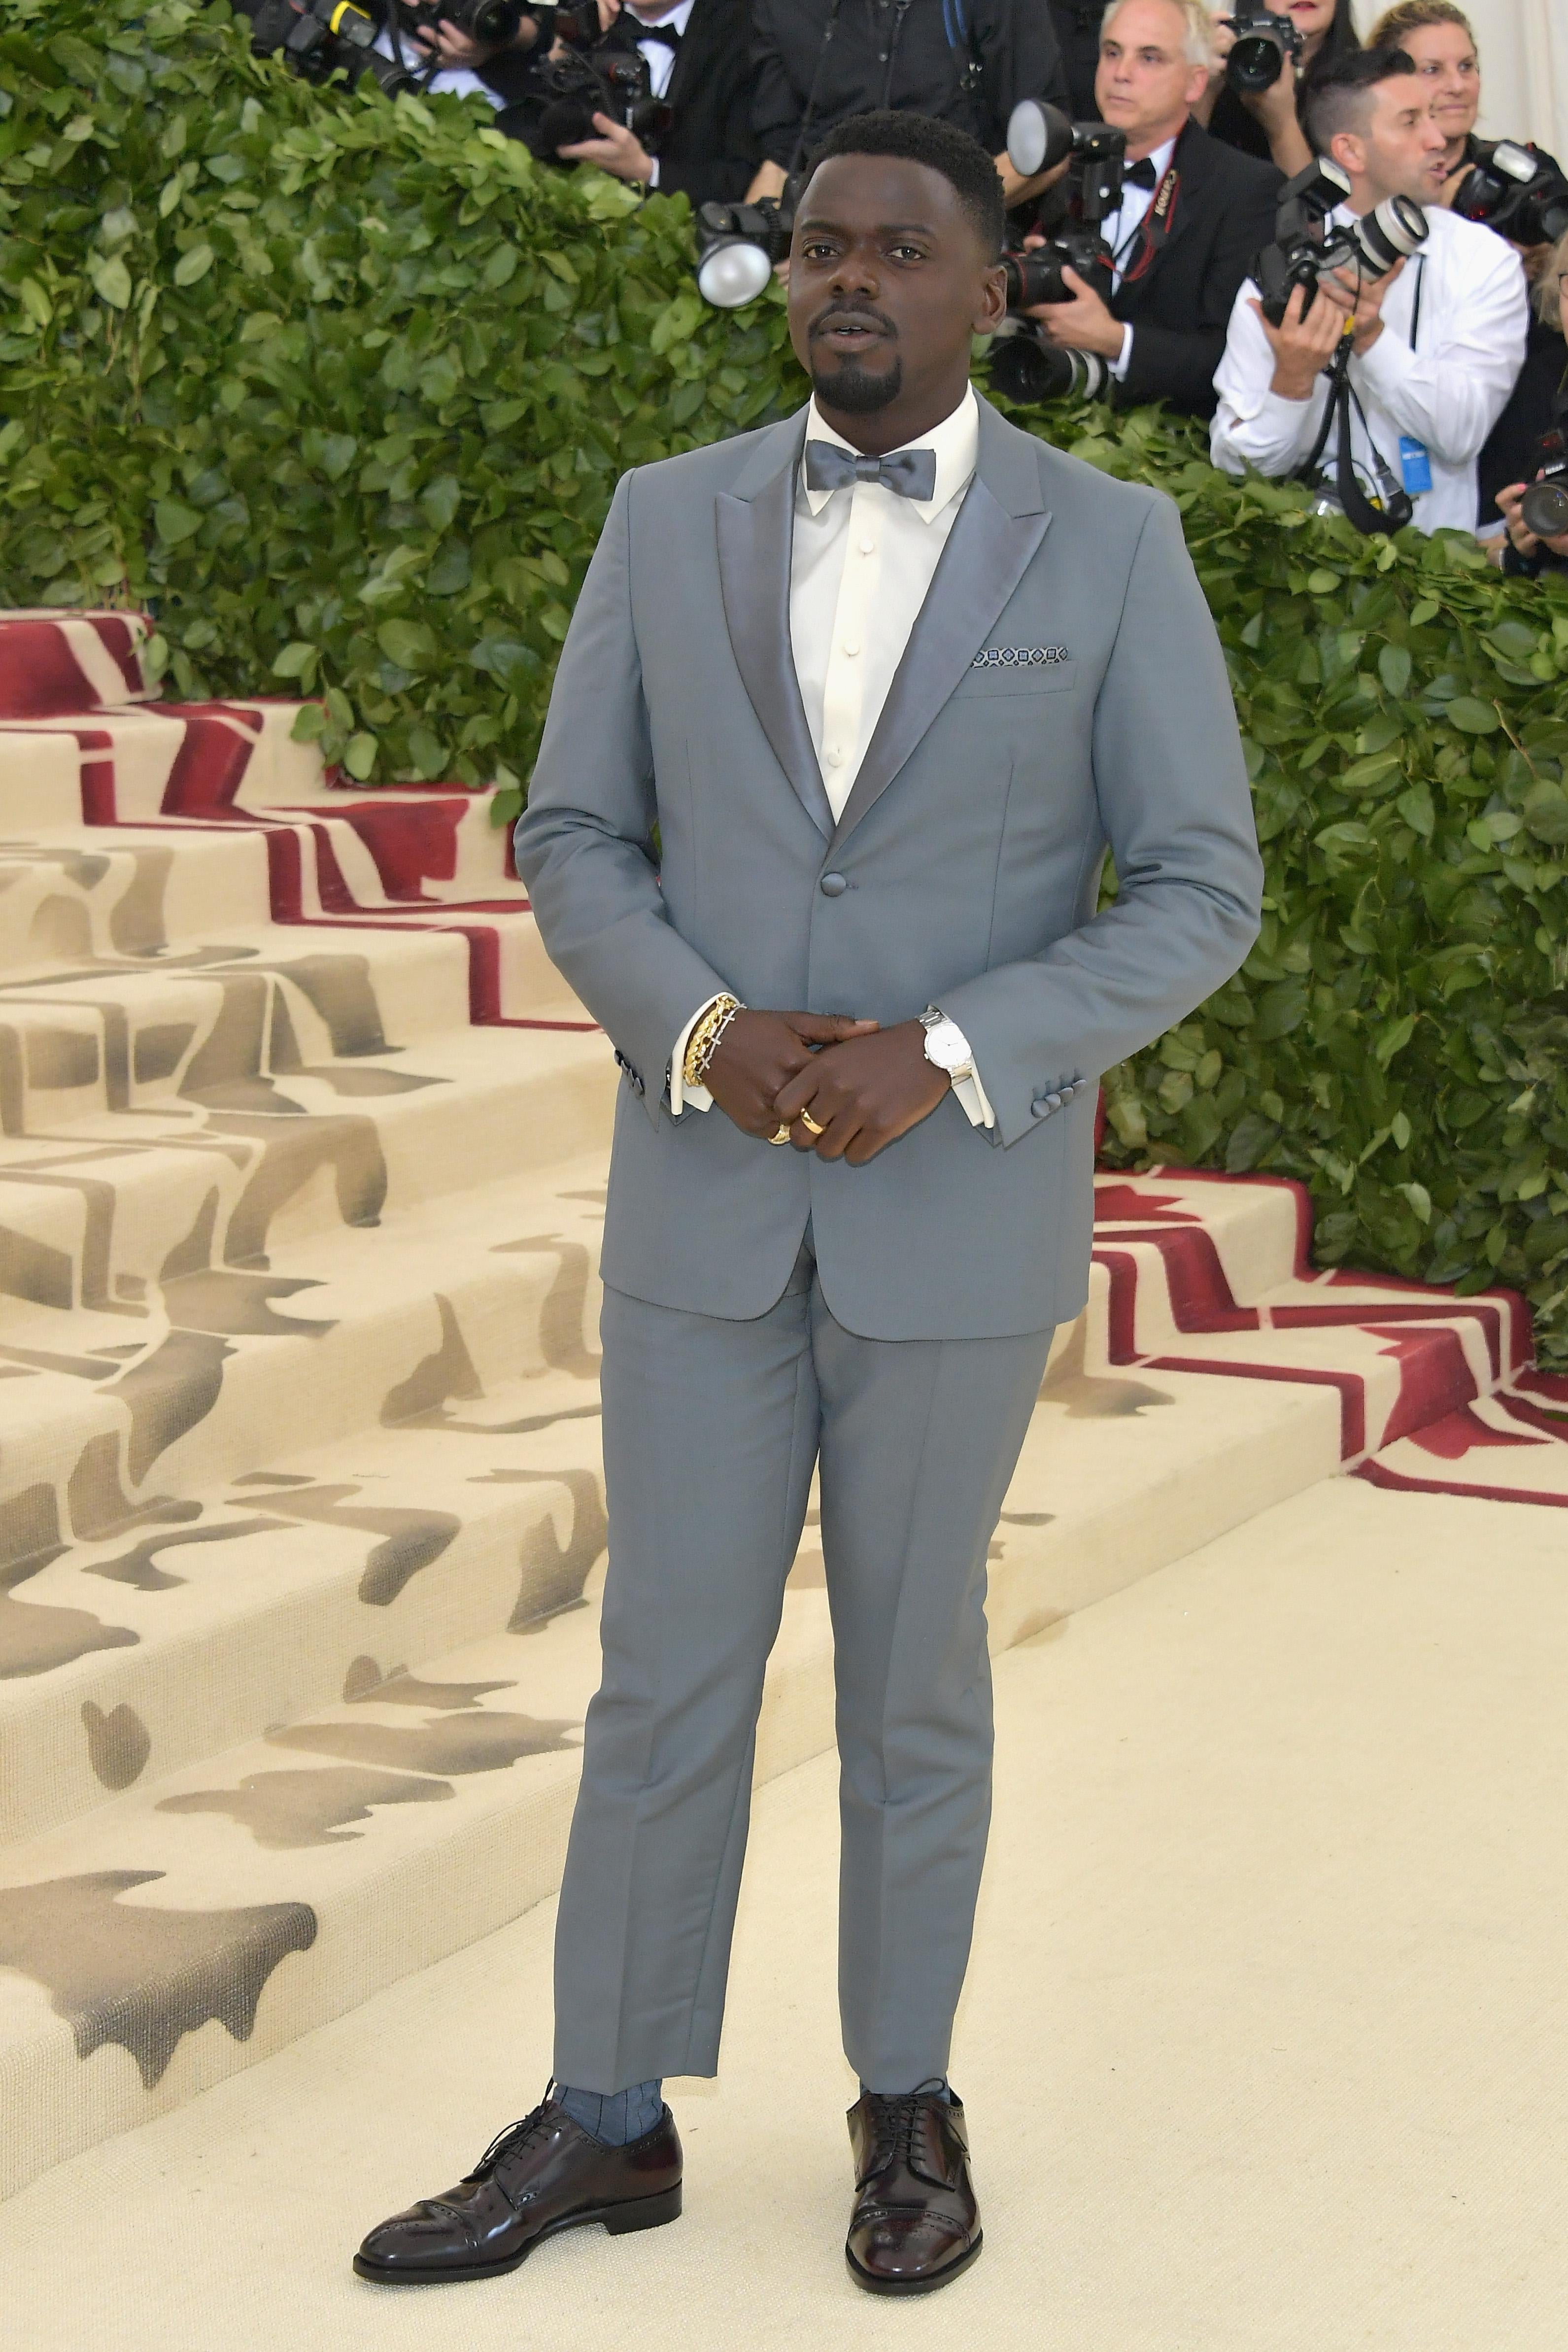 NEW YORK, NY - MAY 07:  Daniel Kaluuya attends the Heavenly Bodies: Fashion & The Catholic Imagination Costume Institute Gala at The Metropolitan Museum of Art on May 7, 2018 in New York City.  (Photo by Neilson Barnard/Getty Images)